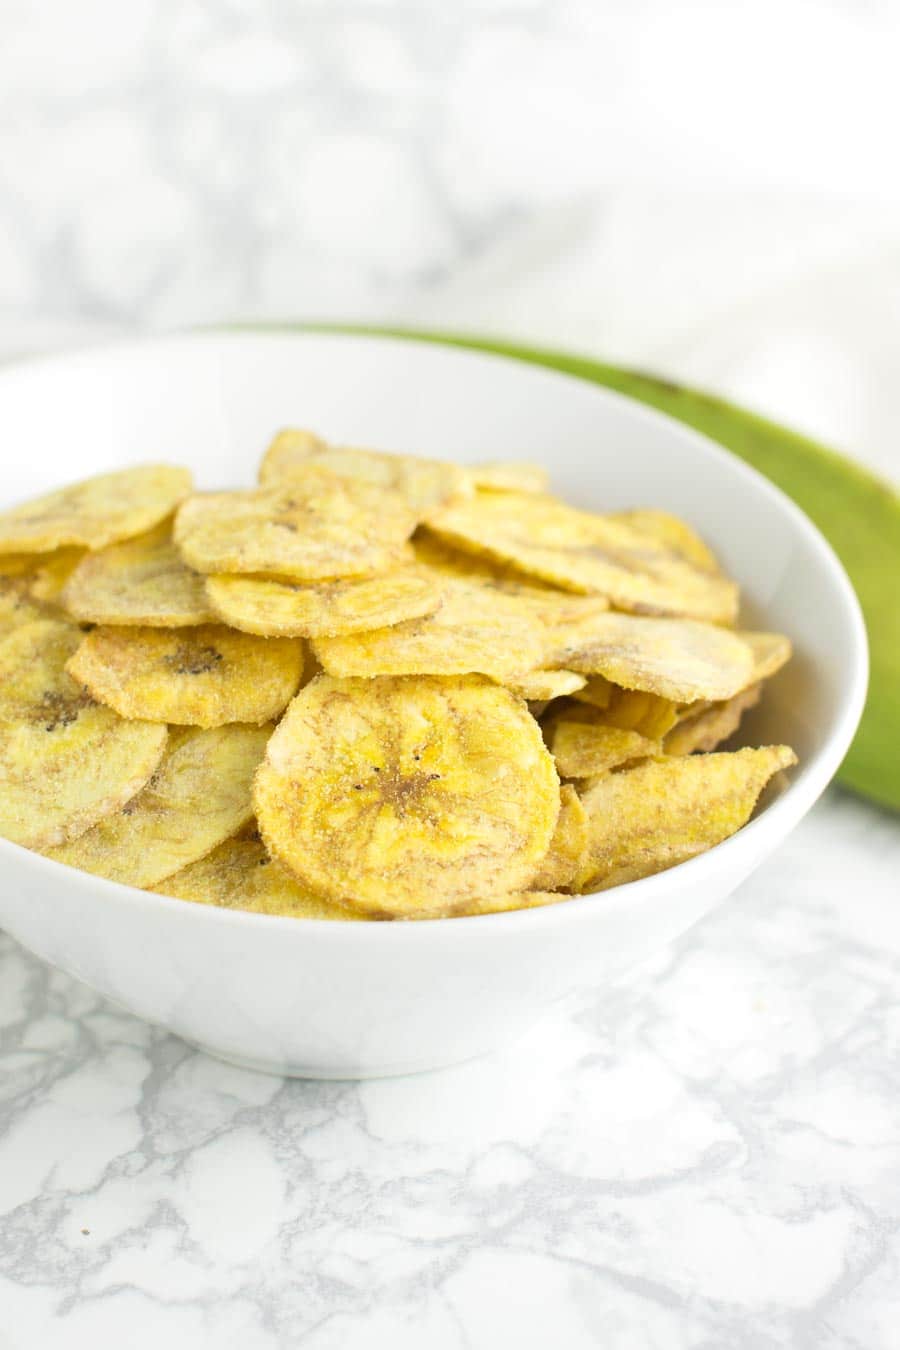 Sour Cream and Onion Plantain Chips recipe from acleanplate.com #paleo #aip #autoimmuneprotocol